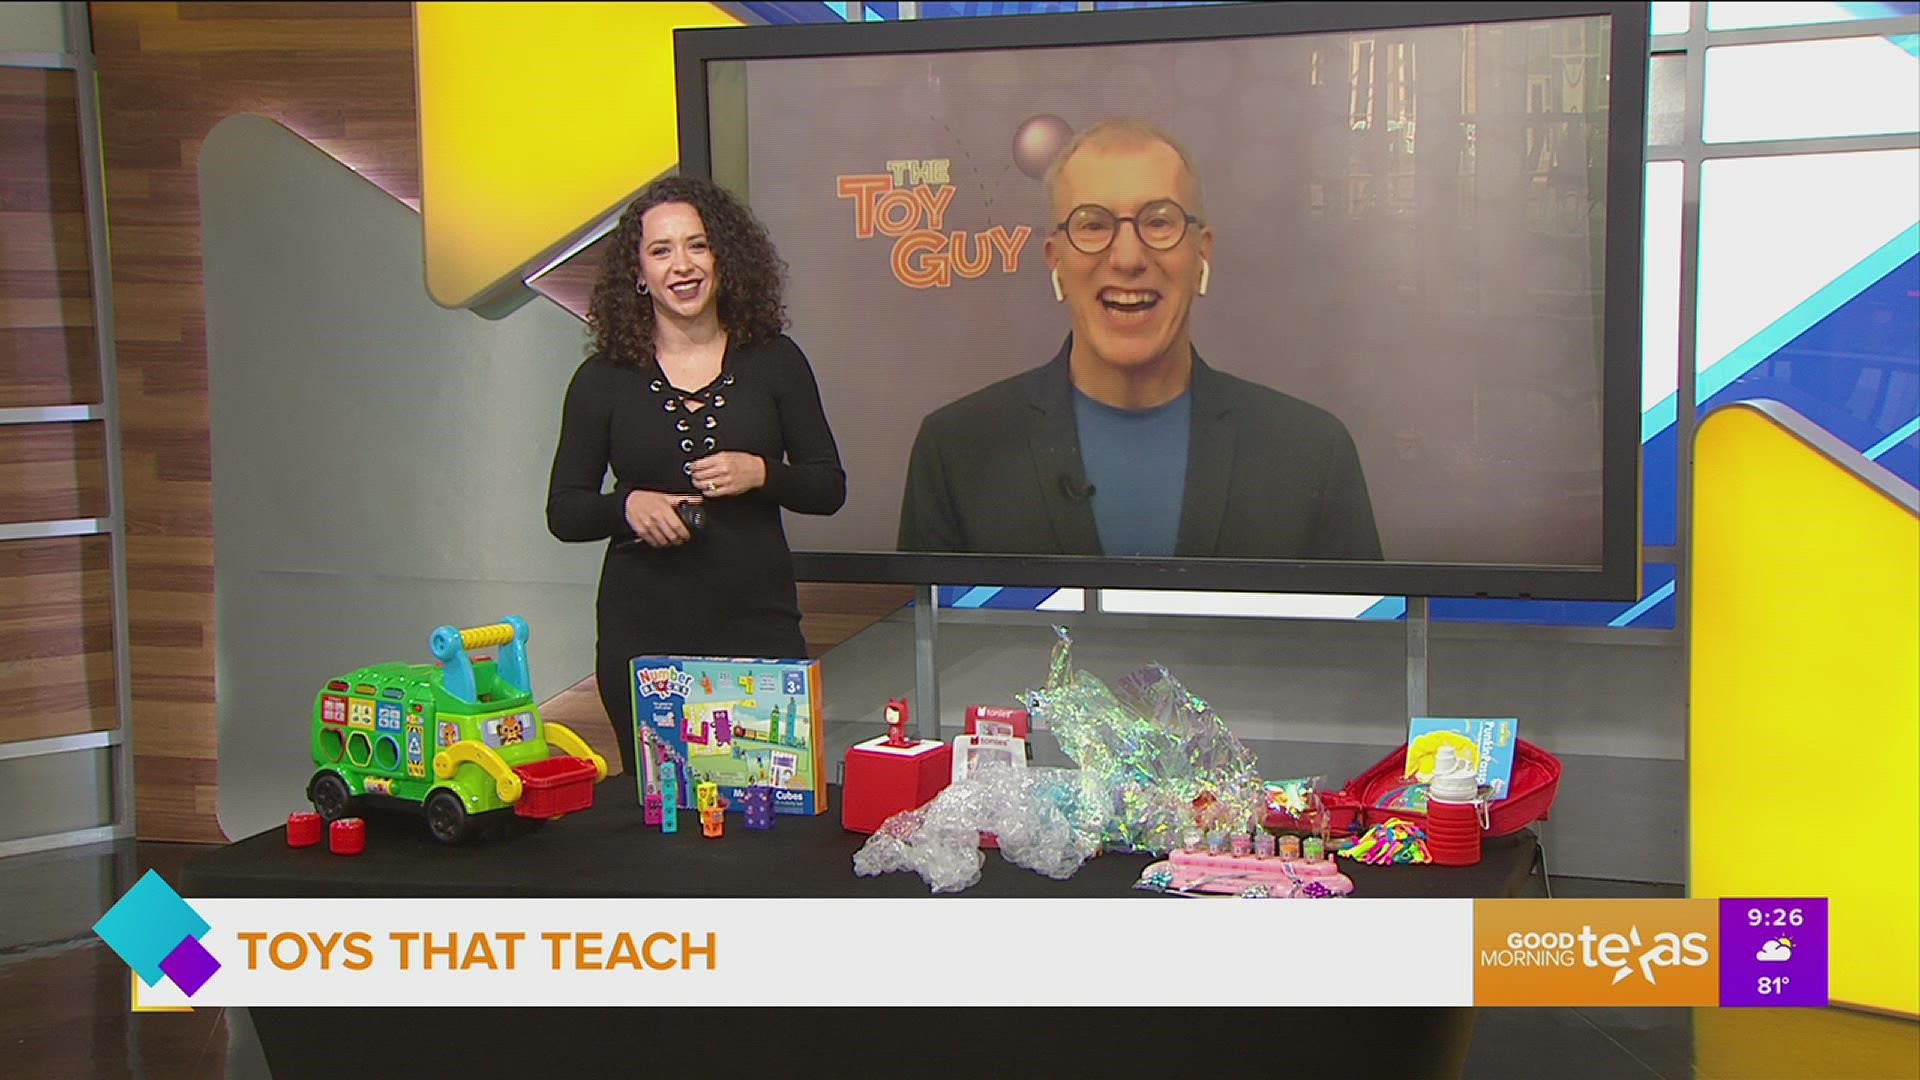 The Toy Guy Chris Byrne shares his top picks for toys that teach as kids head back to school